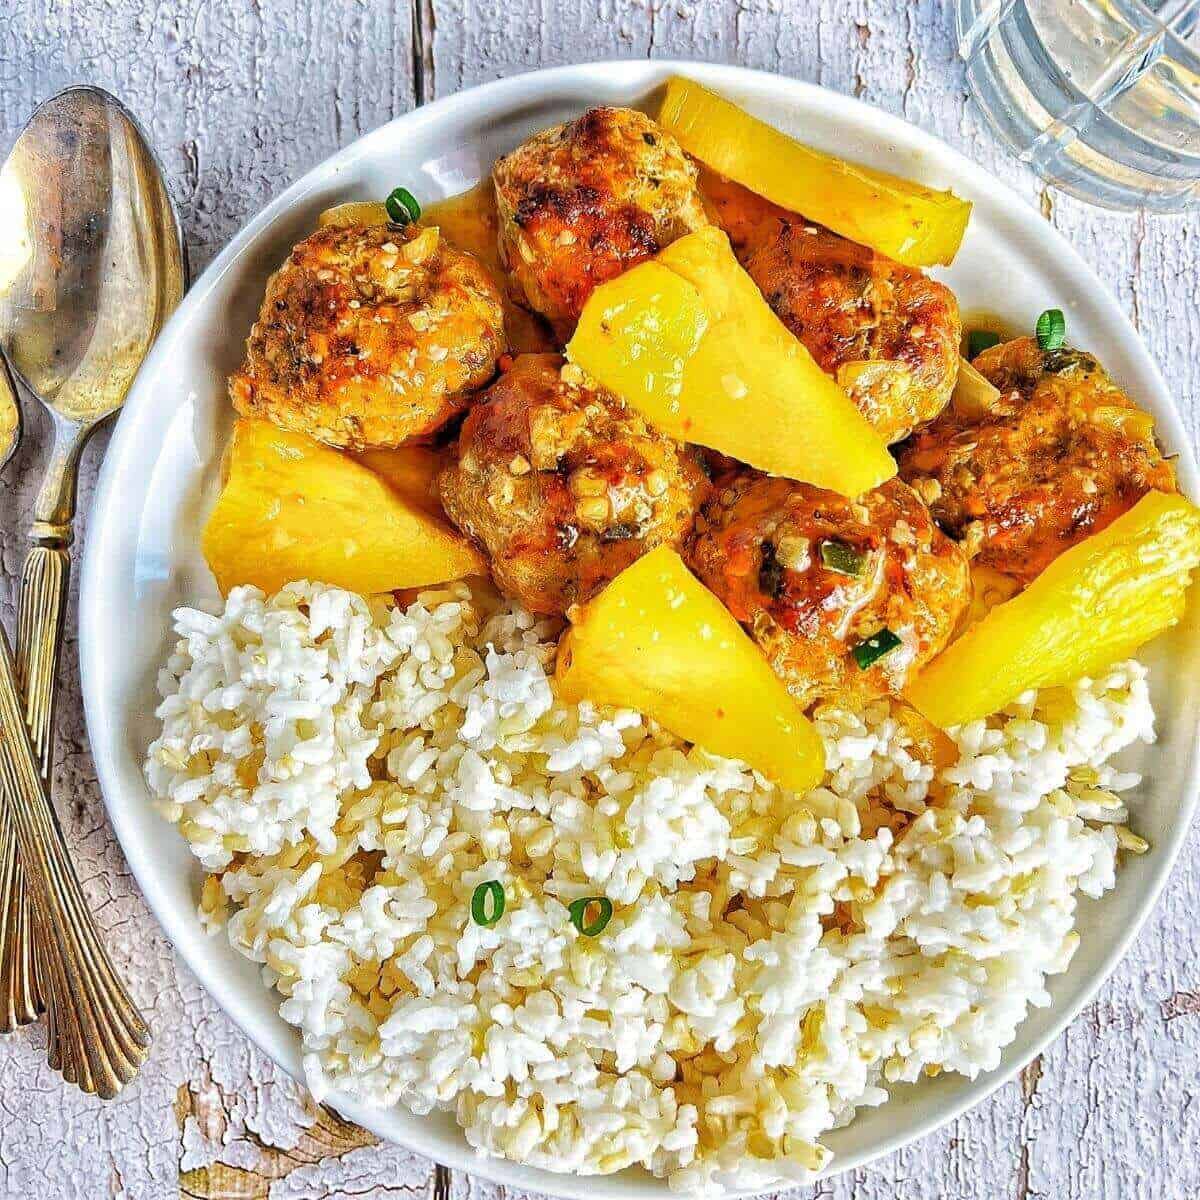 a plate of sweet and sour sauce meatballs with pineapple